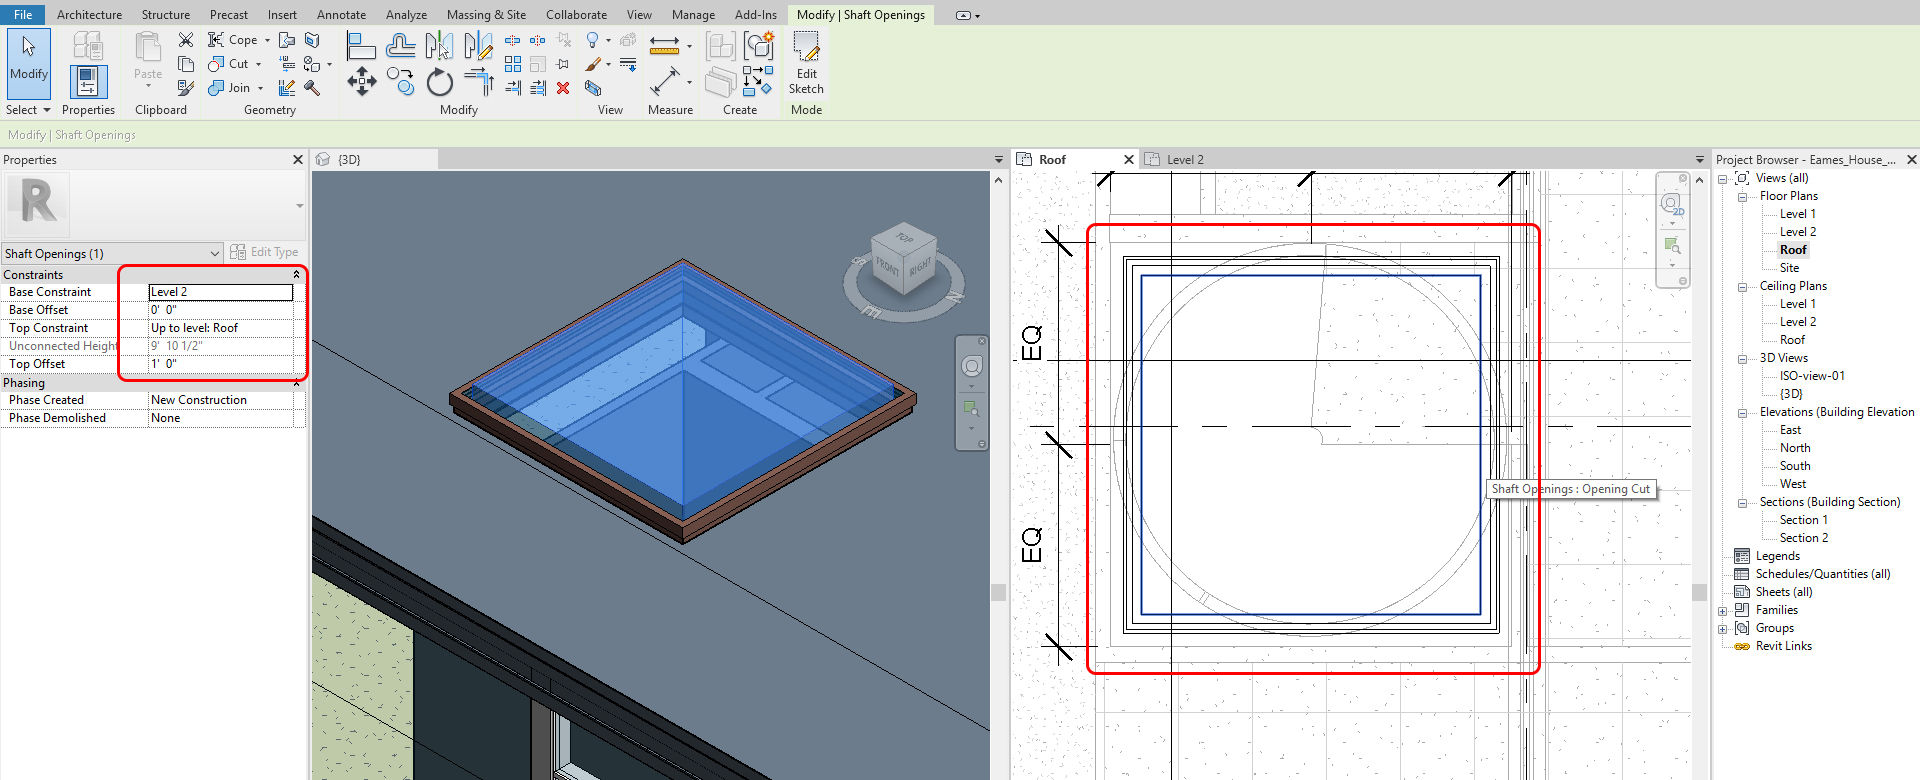 This image shows the resulting image after using the shaft tool for a skylight.